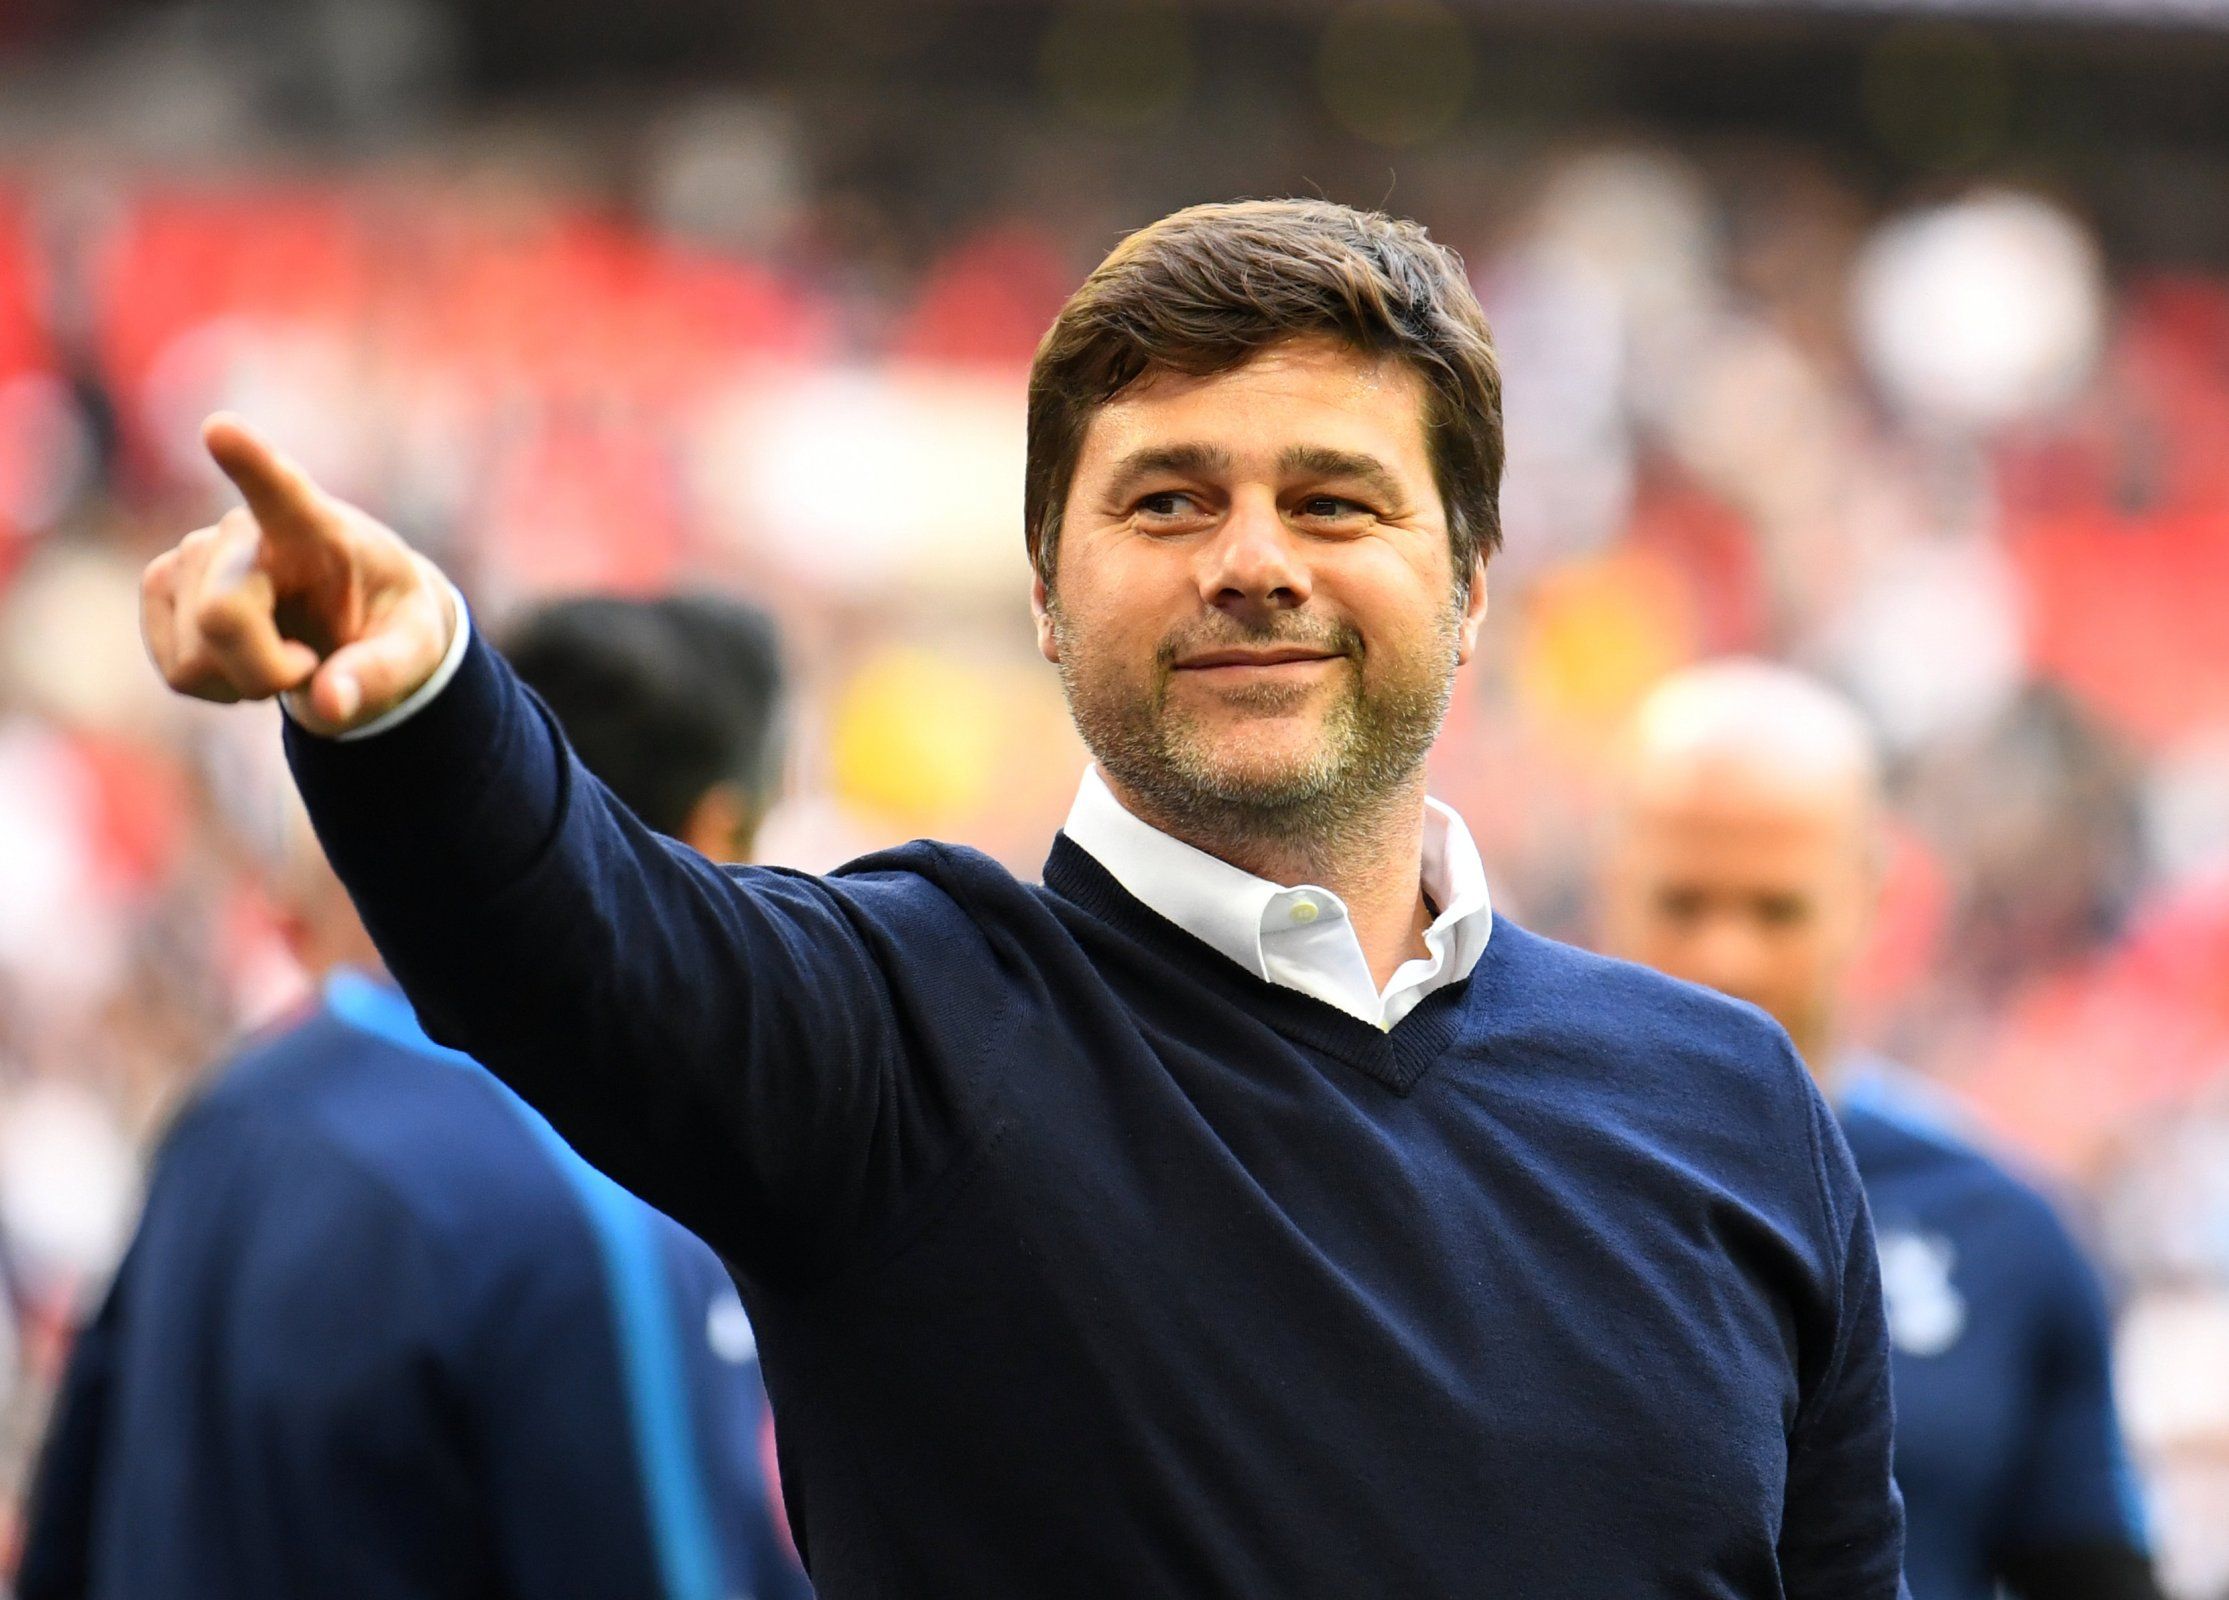 Mauricio Pochettino points at the Tottenham fans after beating Leicester City